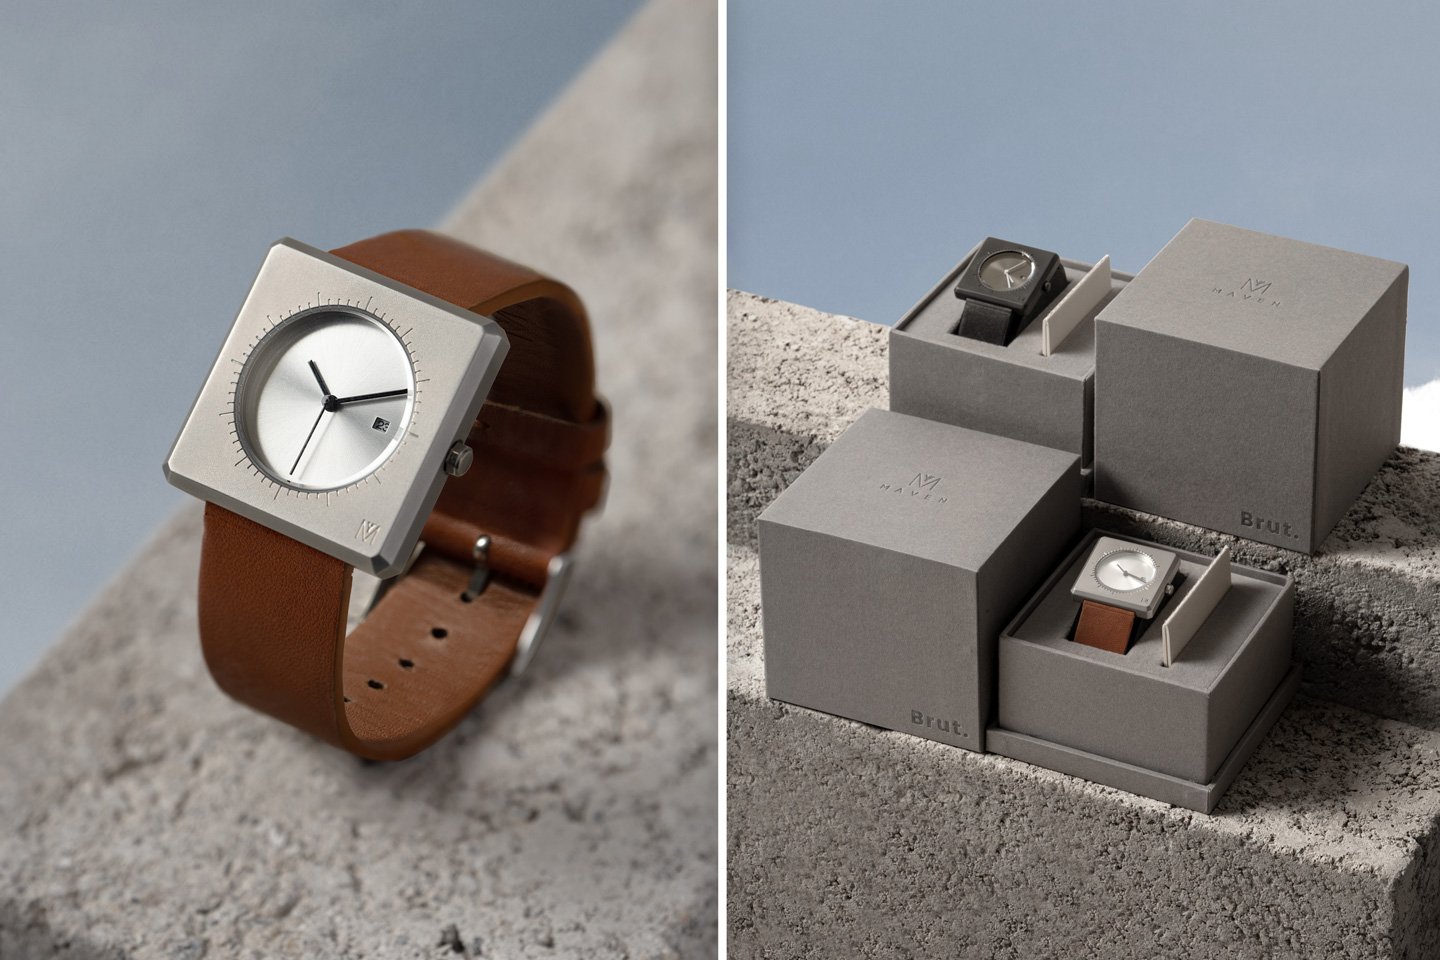 #Maven’s brutalist wristwatch highlights beauty in simplicity with its ‘raw and honest’ design